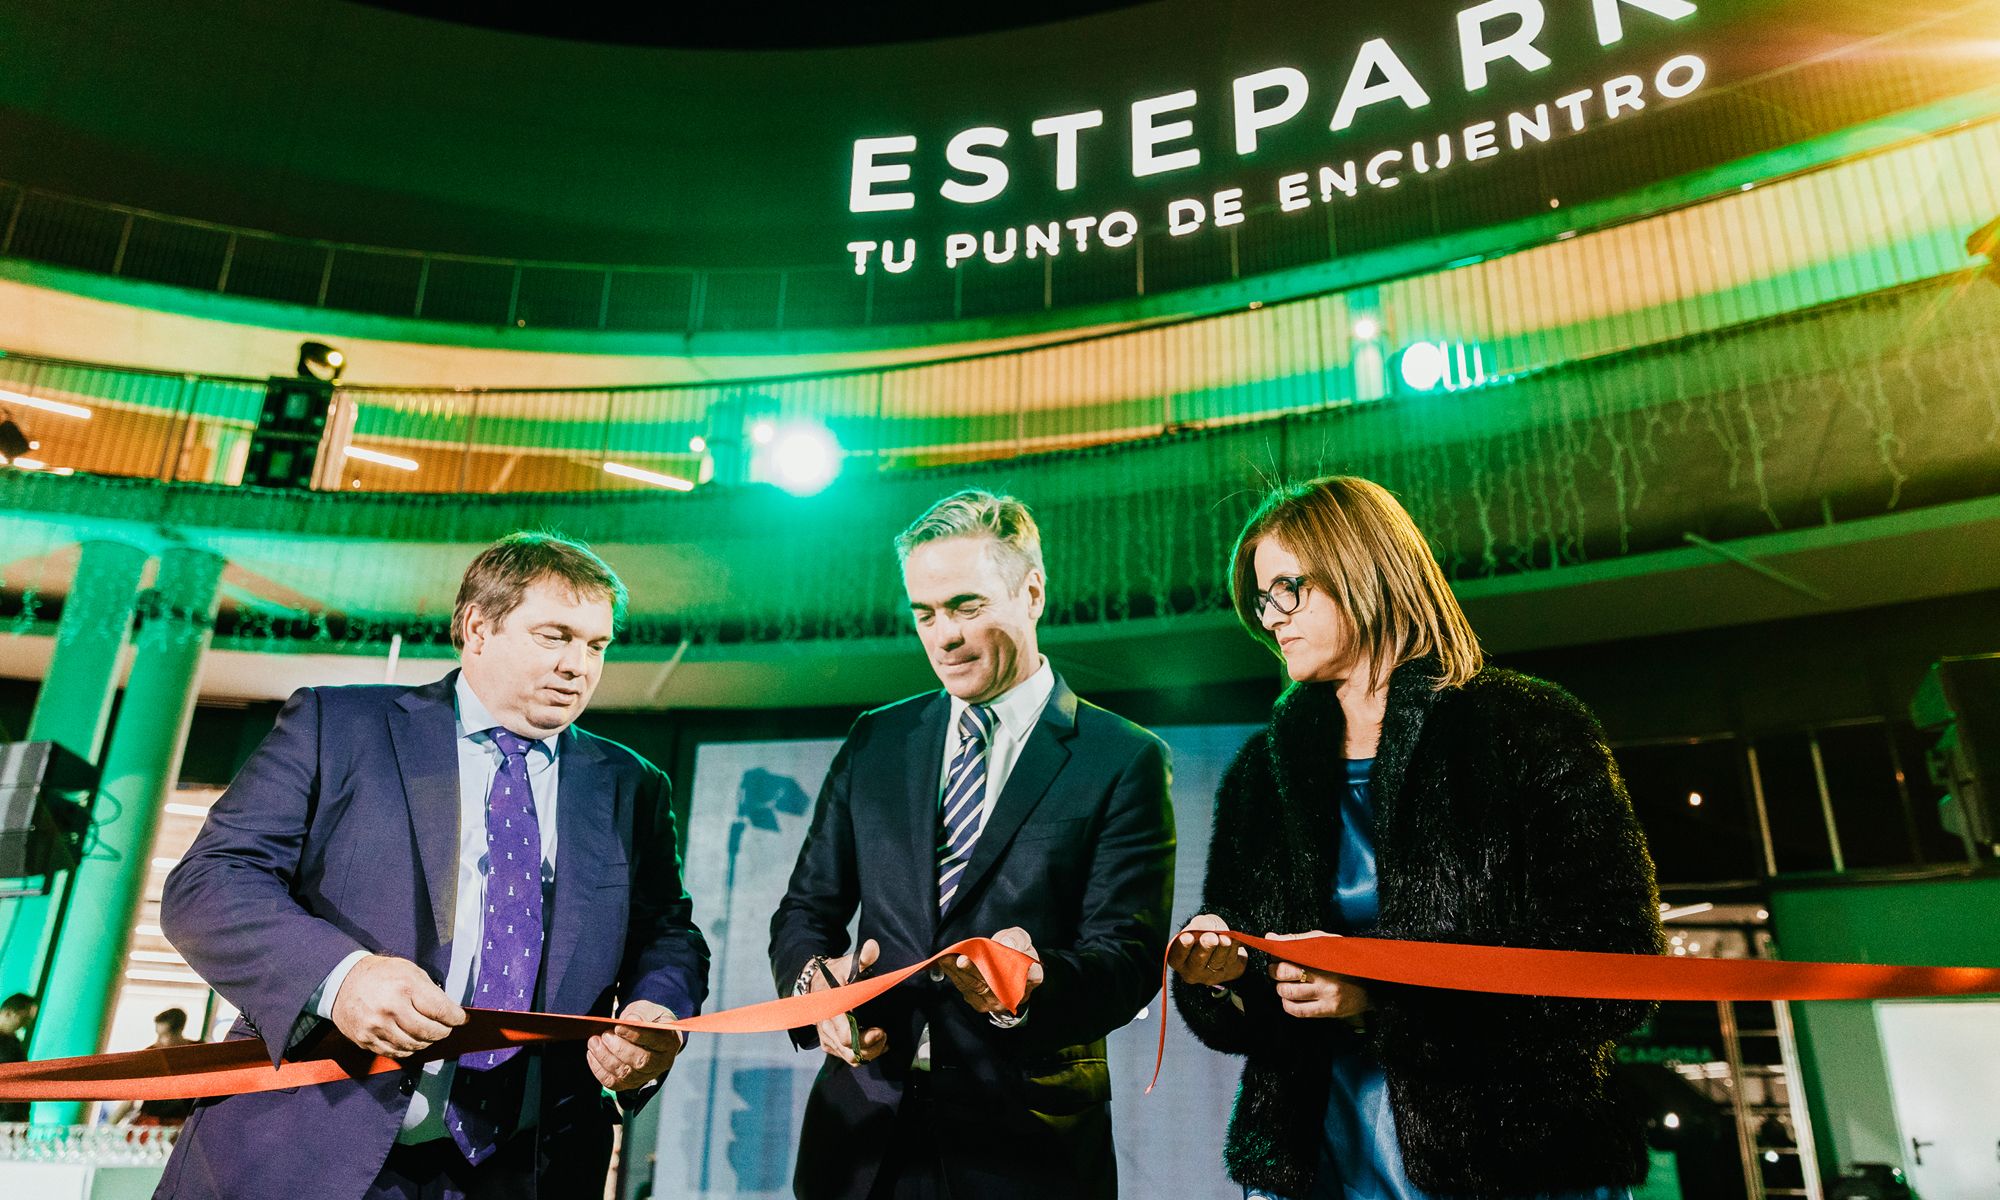 Image of the opening of the shopping center Estepark